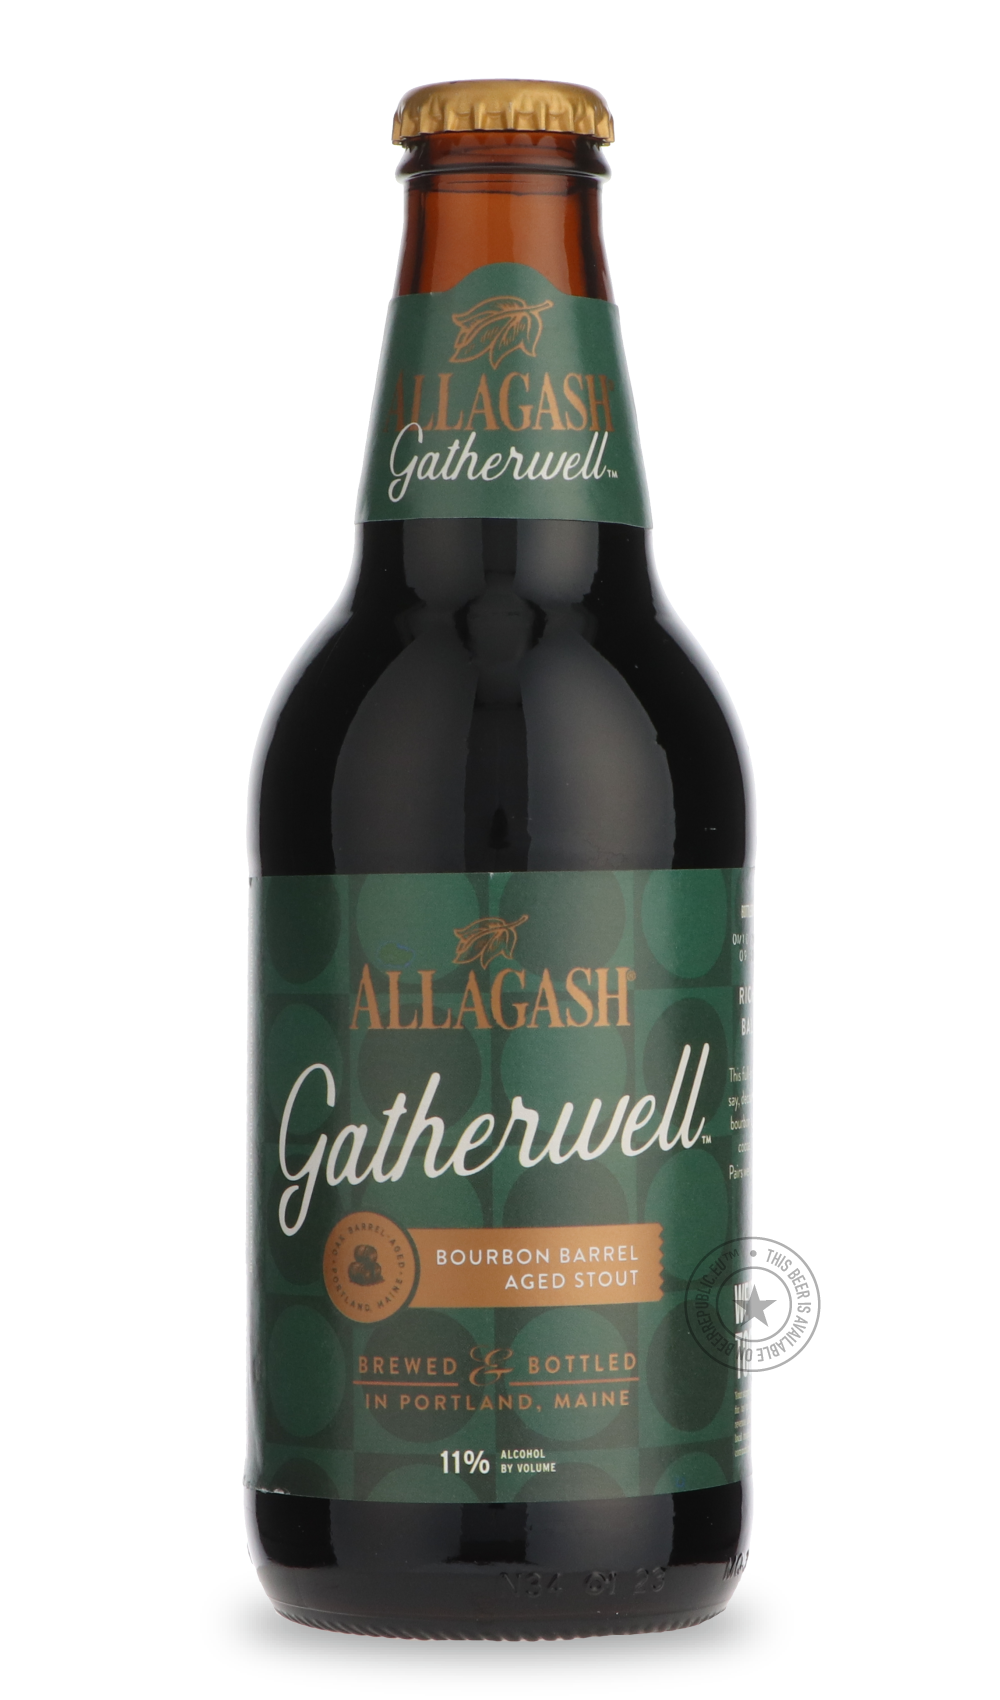 -Allagash- Gatherwell-Stout & Porter- Only @ Beer Republic - The best online beer store for American & Canadian craft beer - Buy beer online from the USA and Canada - Bier online kopen - Amerikaans bier kopen - Craft beer store - Craft beer kopen - Amerikanisch bier kaufen - Bier online kaufen - Acheter biere online - IPA - Stout - Porter - New England IPA - Hazy IPA - Imperial Stout - Barrel Aged - Barrel Aged Imperial Stout - Brown - Dark beer - Blond - Blonde - Pilsner - Lager - Wheat - Weizen - Amber - 